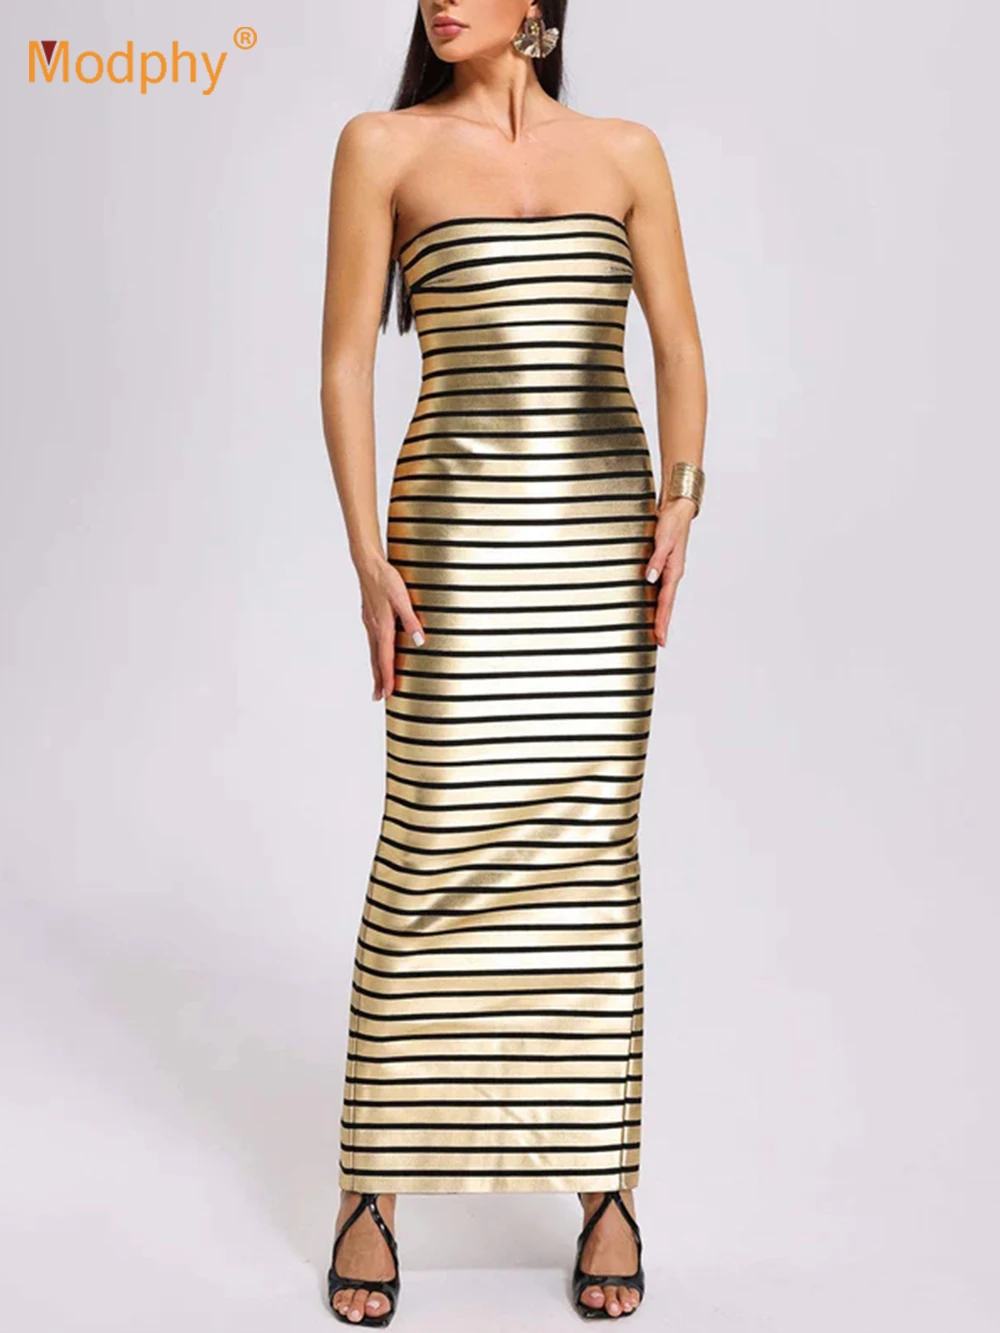 

Modphy Gold Foil Striped Strapless Tight Bandage Long Dress For Women Sexy Sleeveless Bodycon Club Party Fashion Celebrity Dress